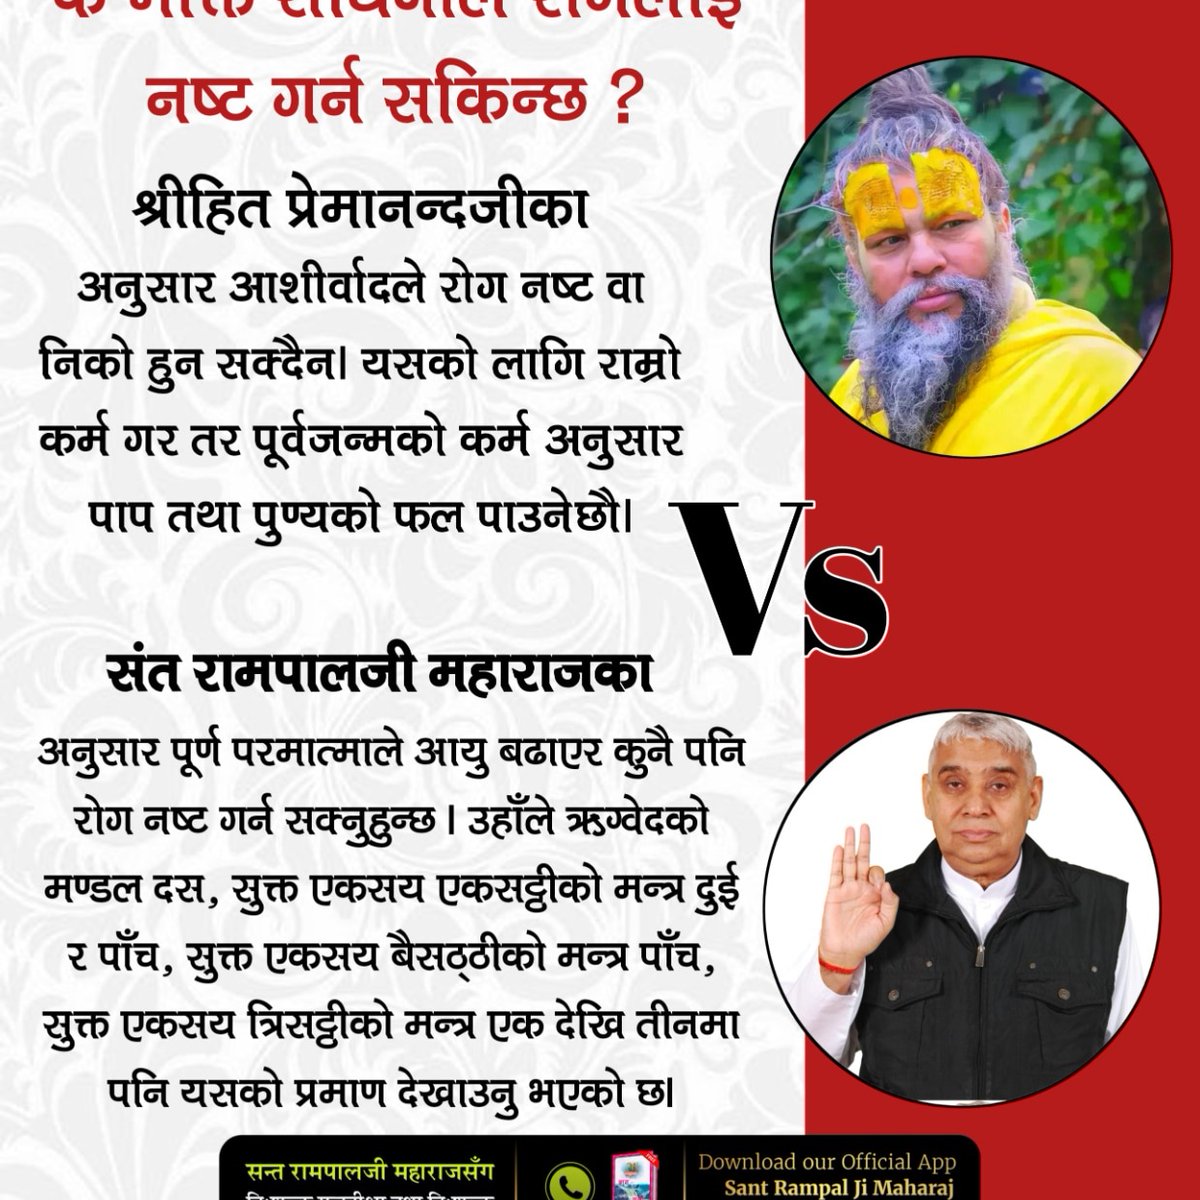 #आउनुहोस्_सनातनलाई_जानौँ
Which disease can be cured?  Shri Hit Premananda Ji: With his blessings, I can cure the disease.  But, God can increase your age and destroy some diseases.  Evidence: Rigveda Mandal 10, Sukta 161, Mantra 2, 5, Sukta 162, Mantra 5, Sukta 163, Mantra 1-3.